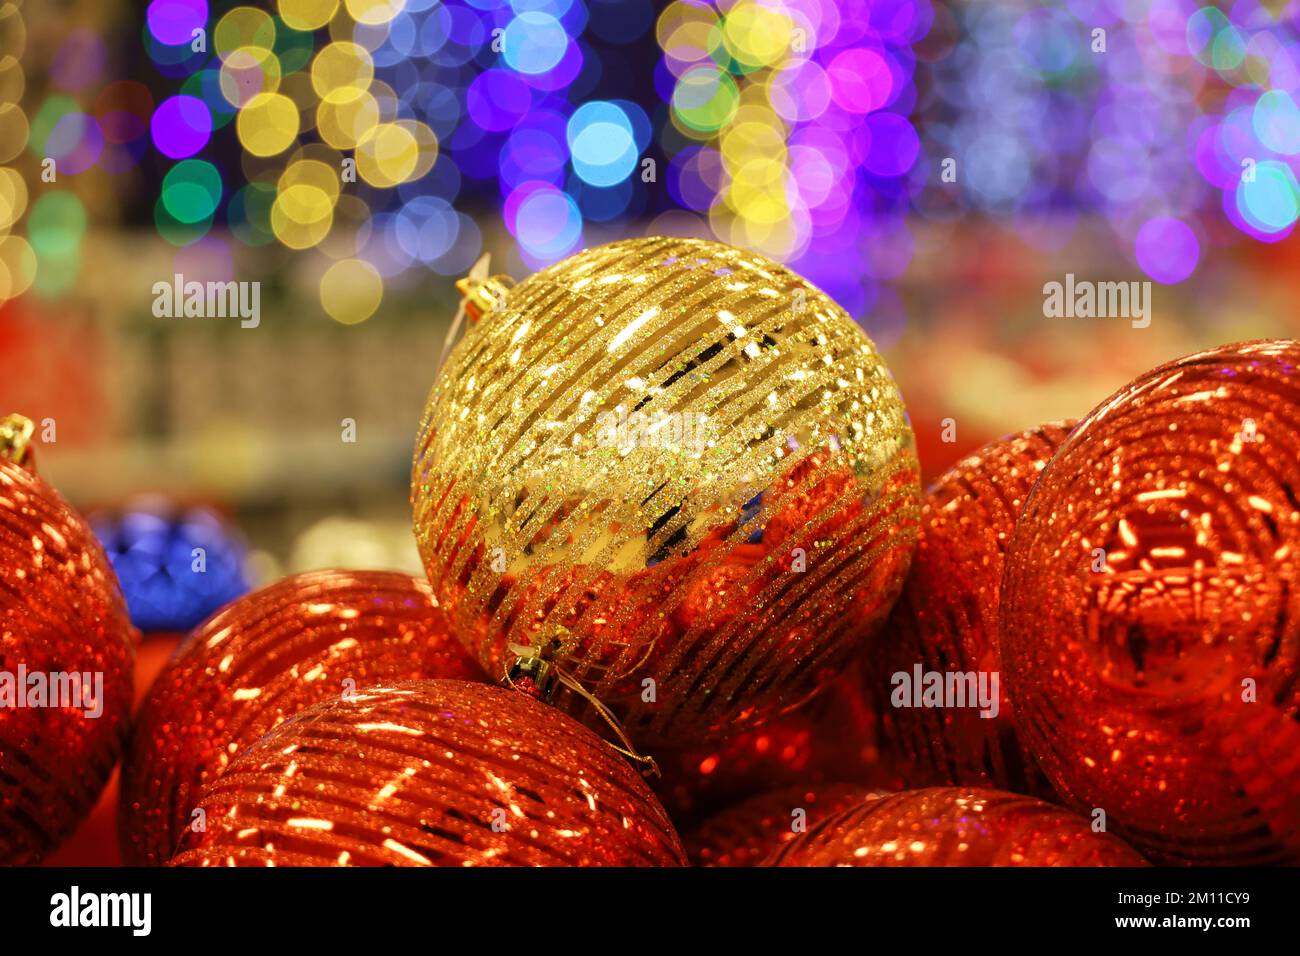 Christmas toys, golden and red balls on blurred festive lights background. New Year decorations in a store Stock Photo